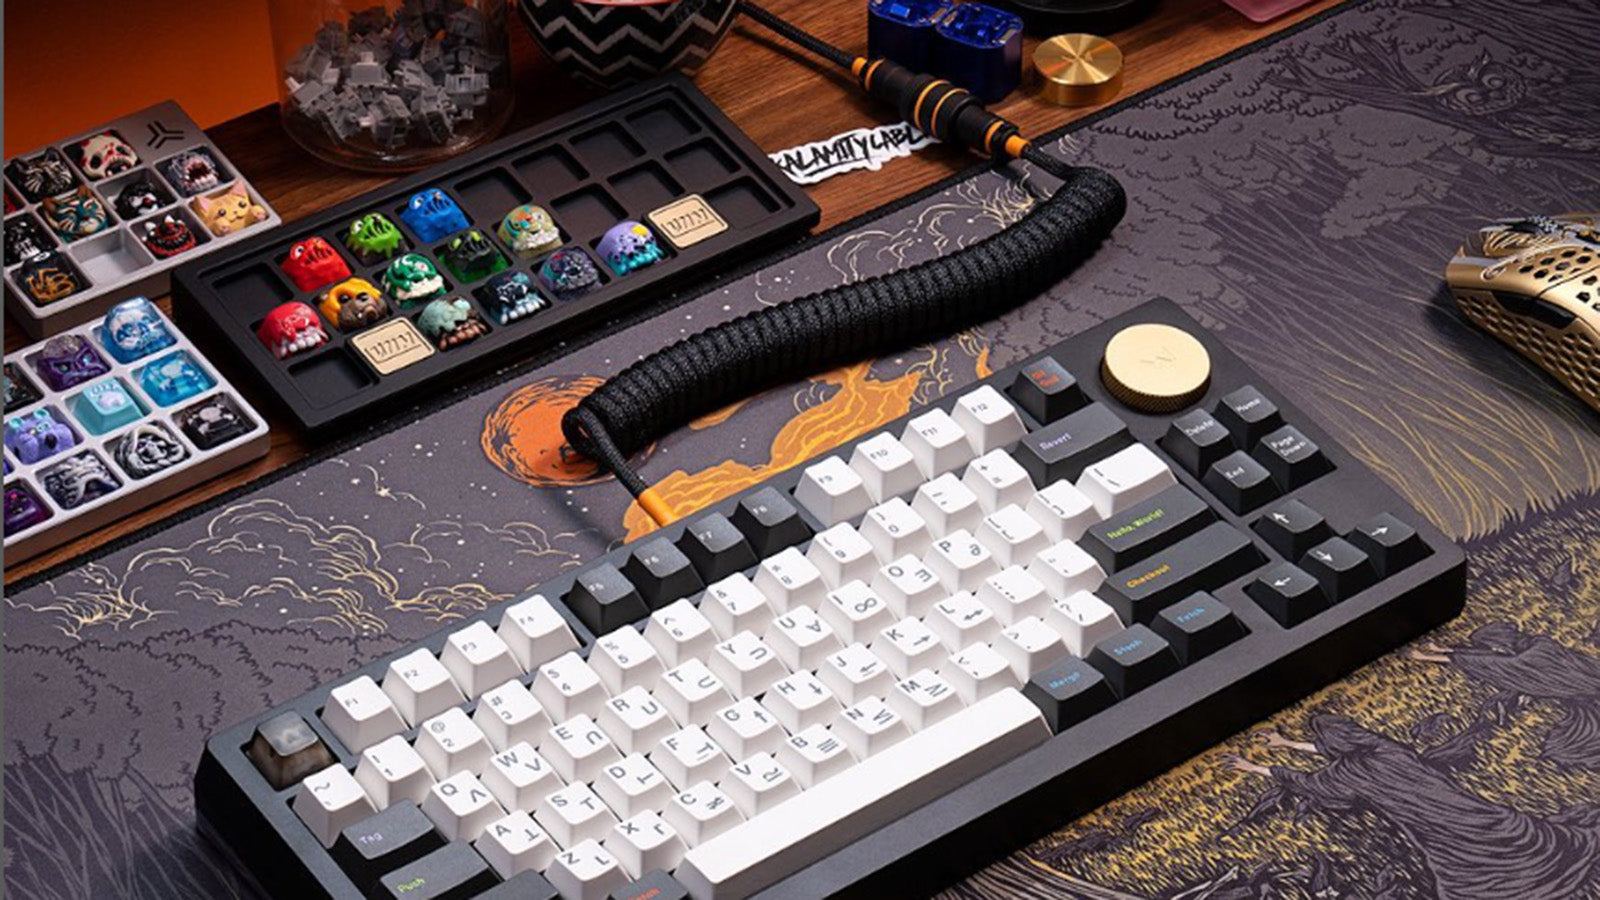 A cool mechanical keyboard on the table